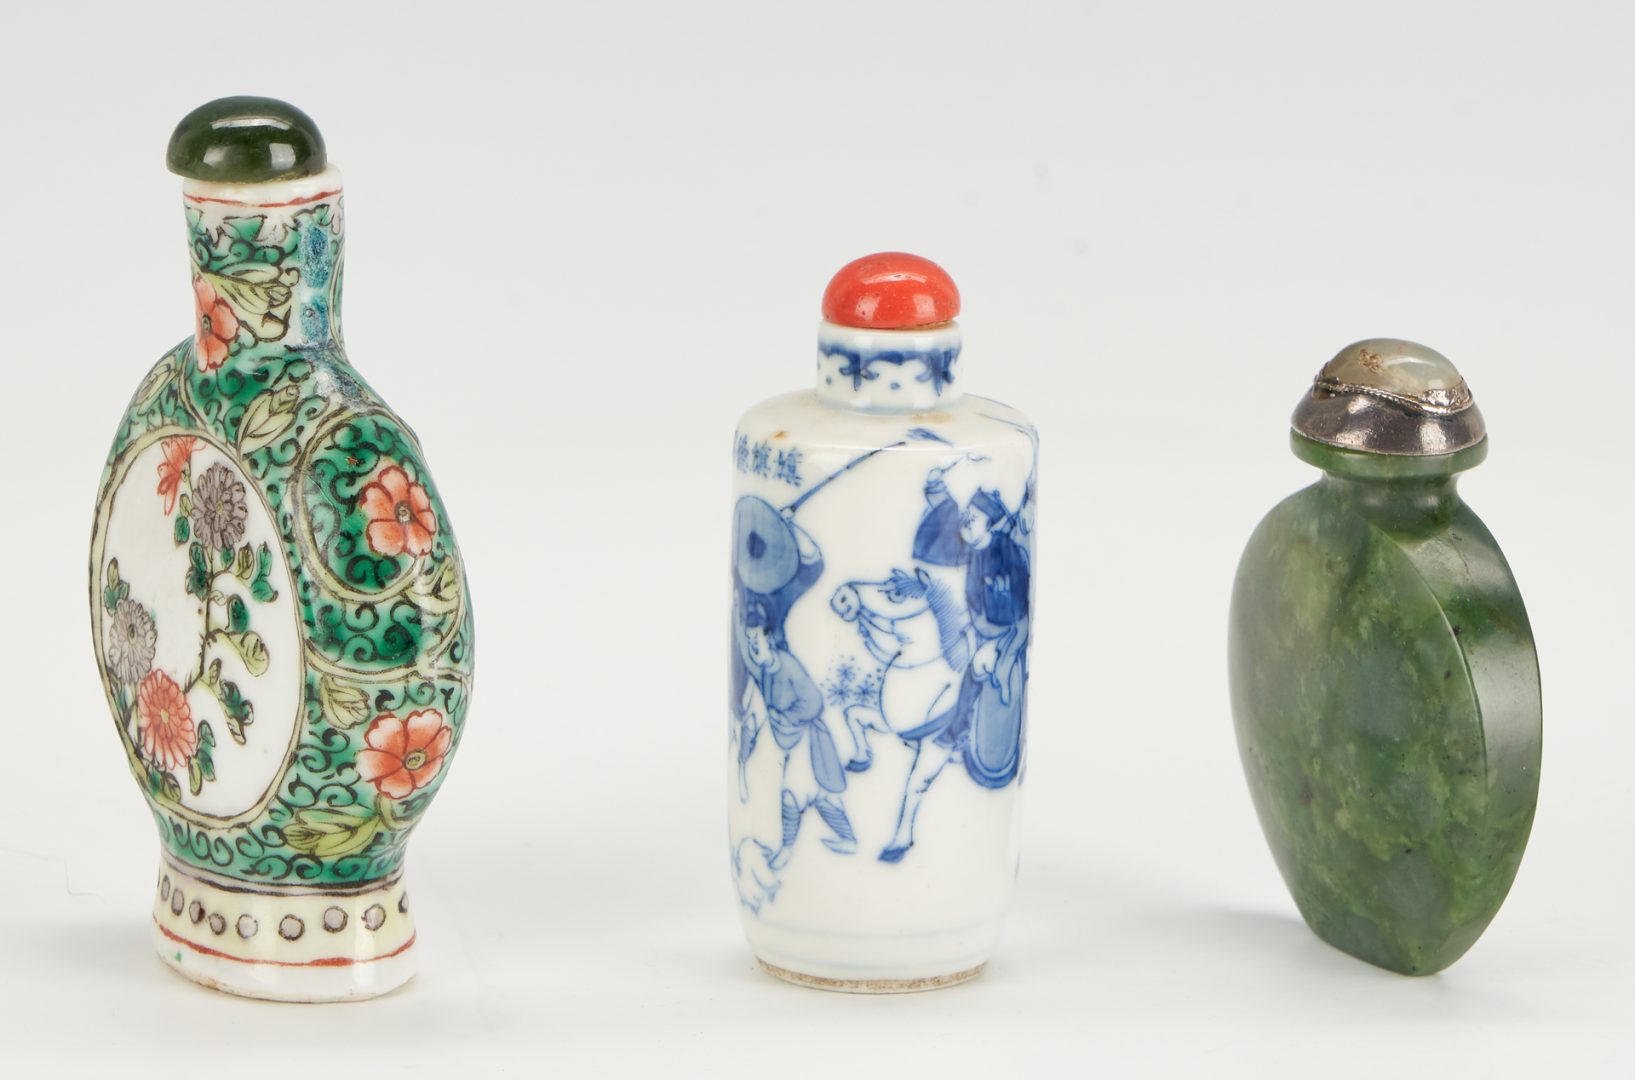 Lot 14: 5 Chinese Snuff Bottles, incl. Jade, Famille Verte, Reverse Painted